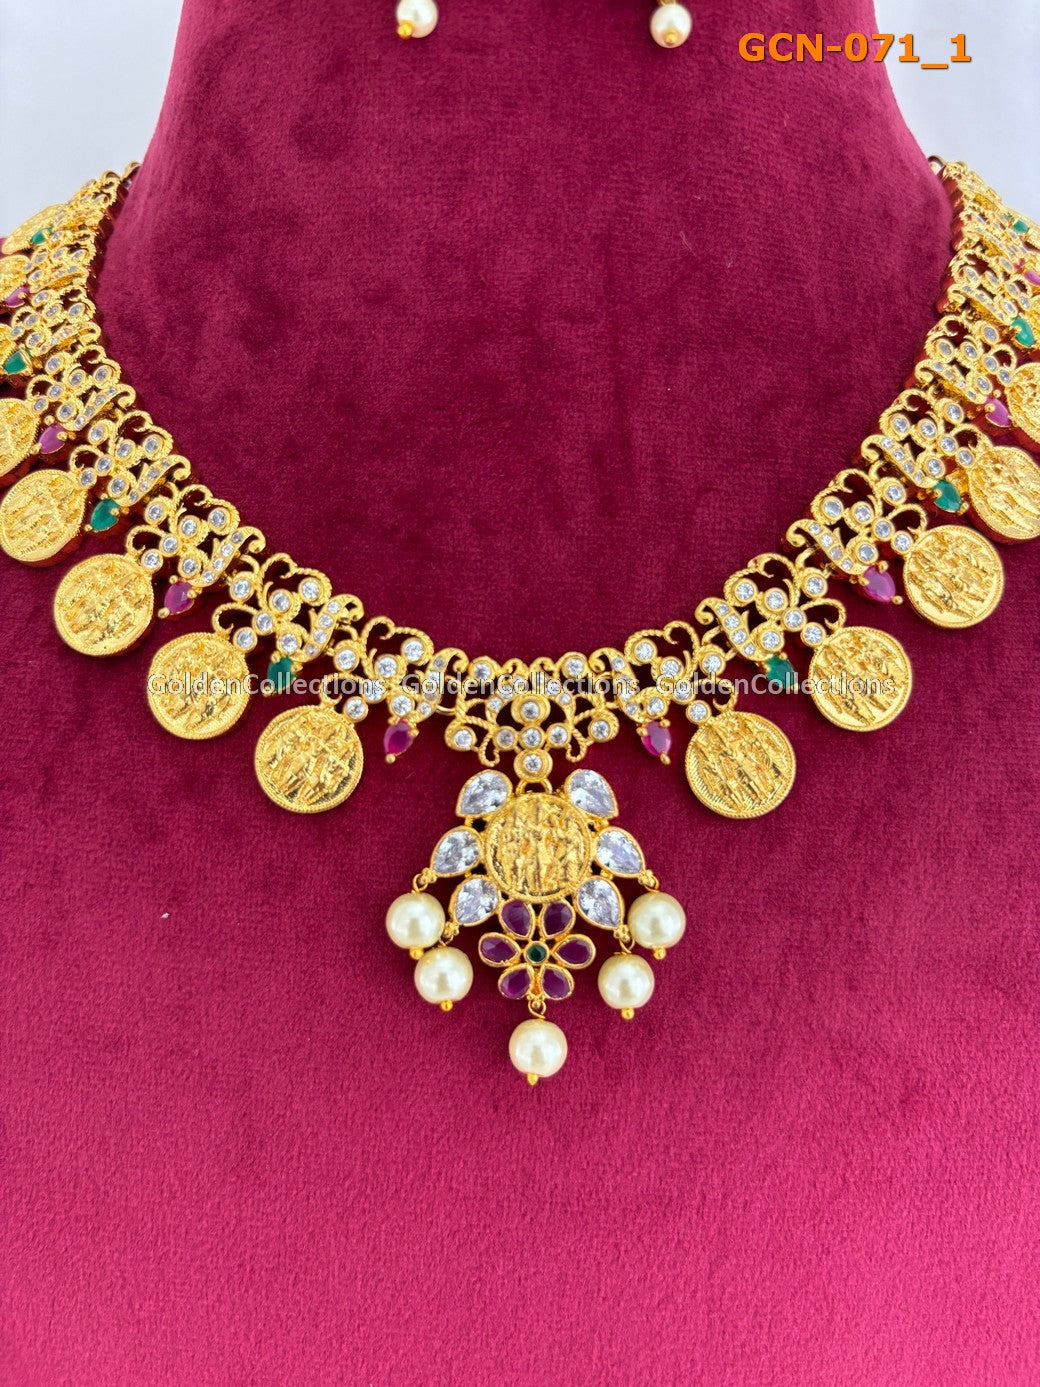 Gale Ka Set : Necklace Set South Indian Golden Collections 2